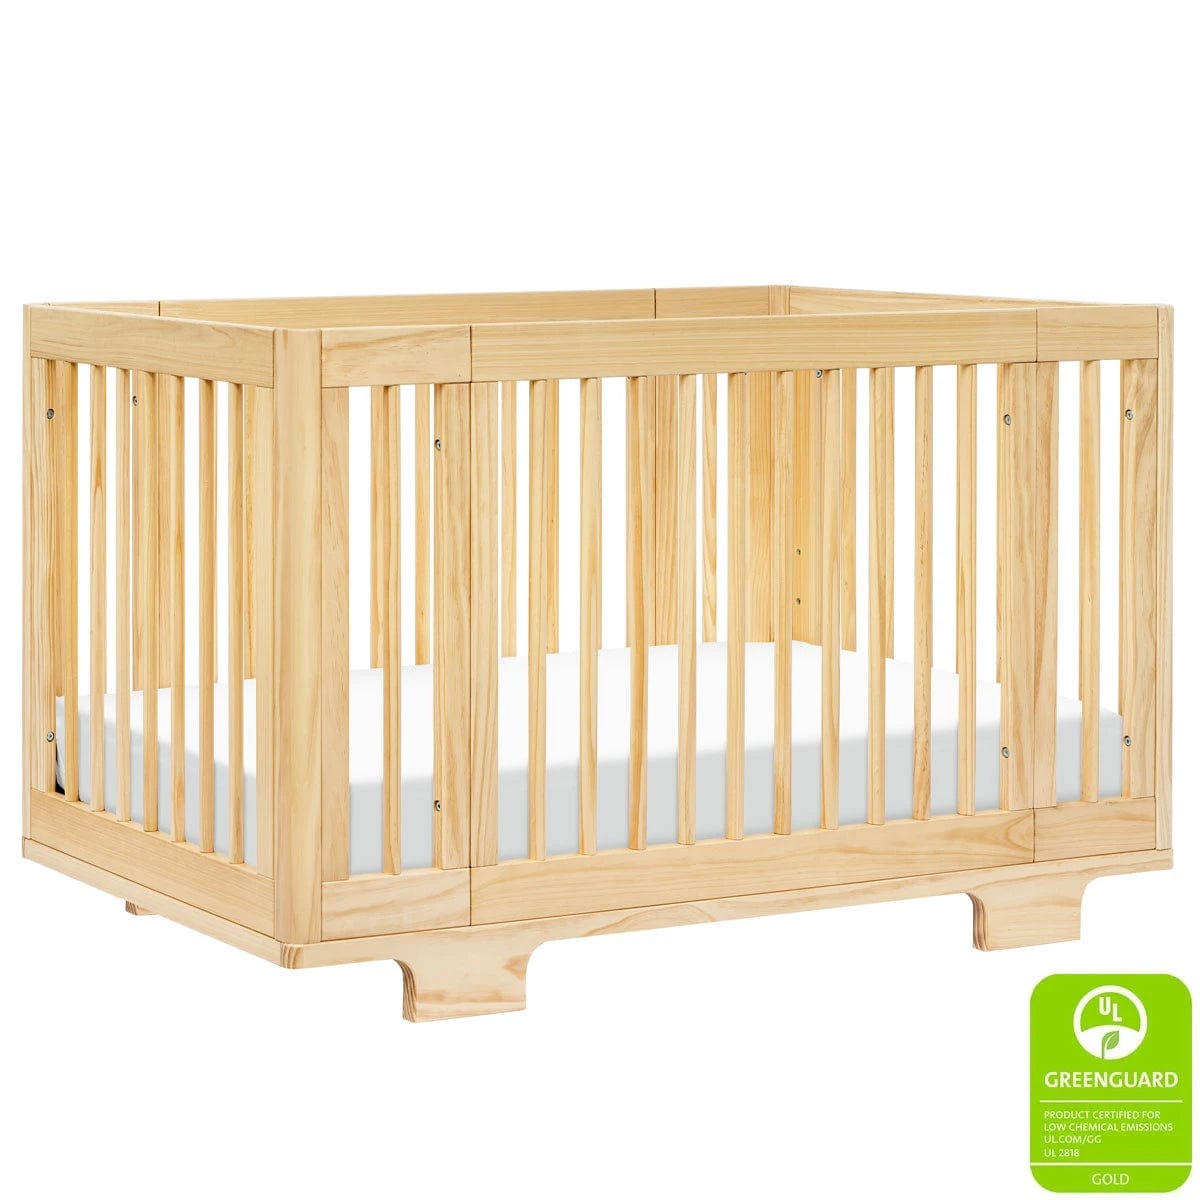 Babyletto crib Natural Babyletto Yuzu 8-in-1 Convertible Crib with All-Stages Conversion Kits